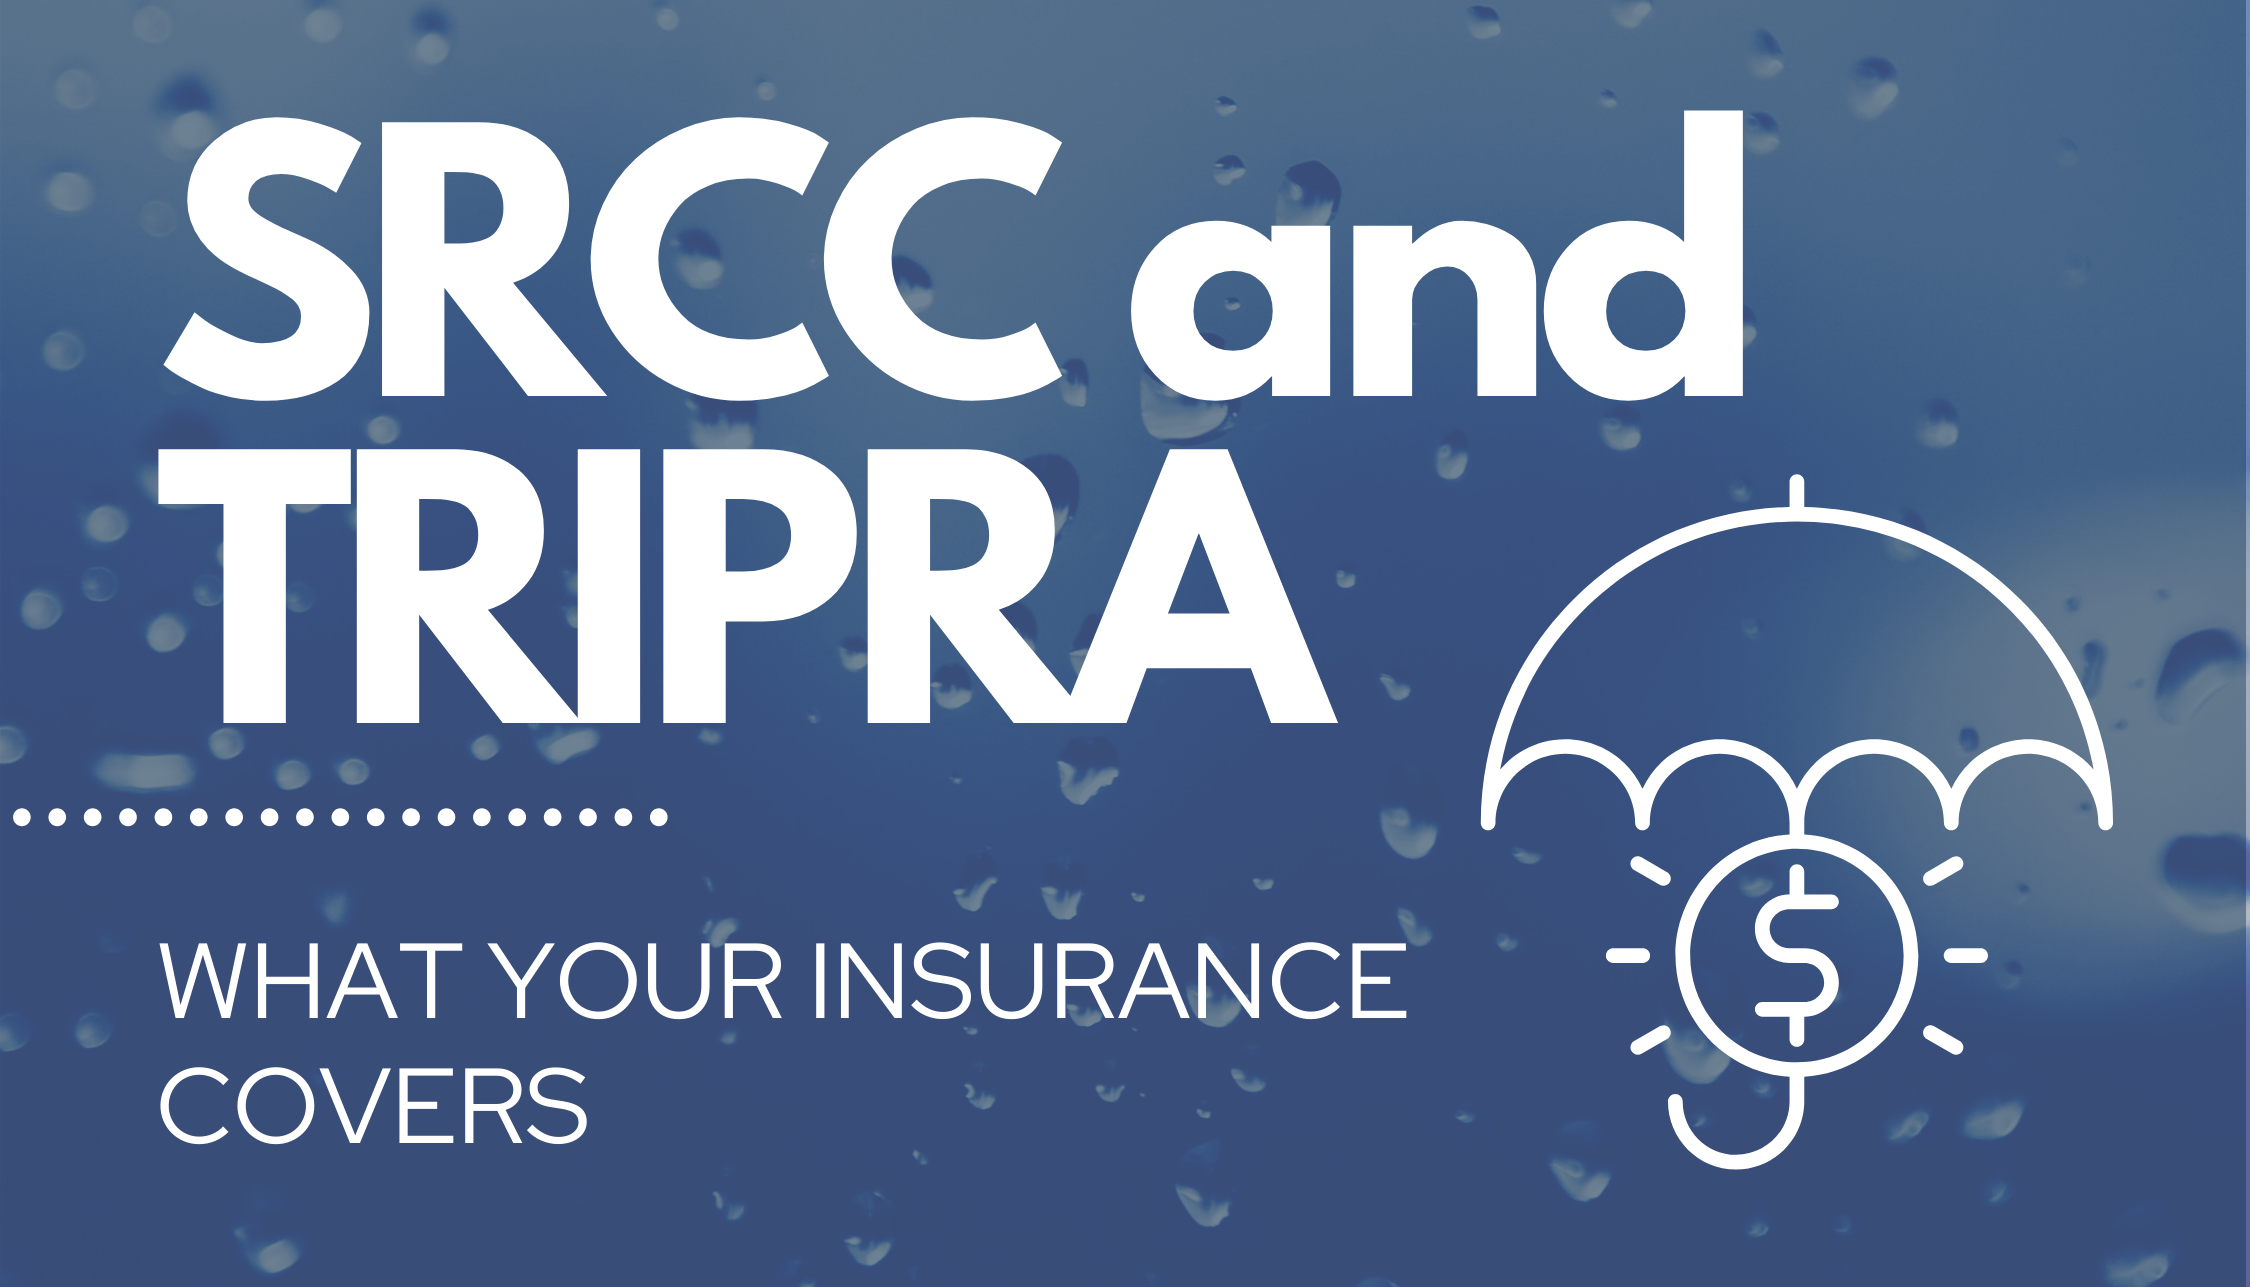 SRCC and TRIPRA What Your Insurance Covers